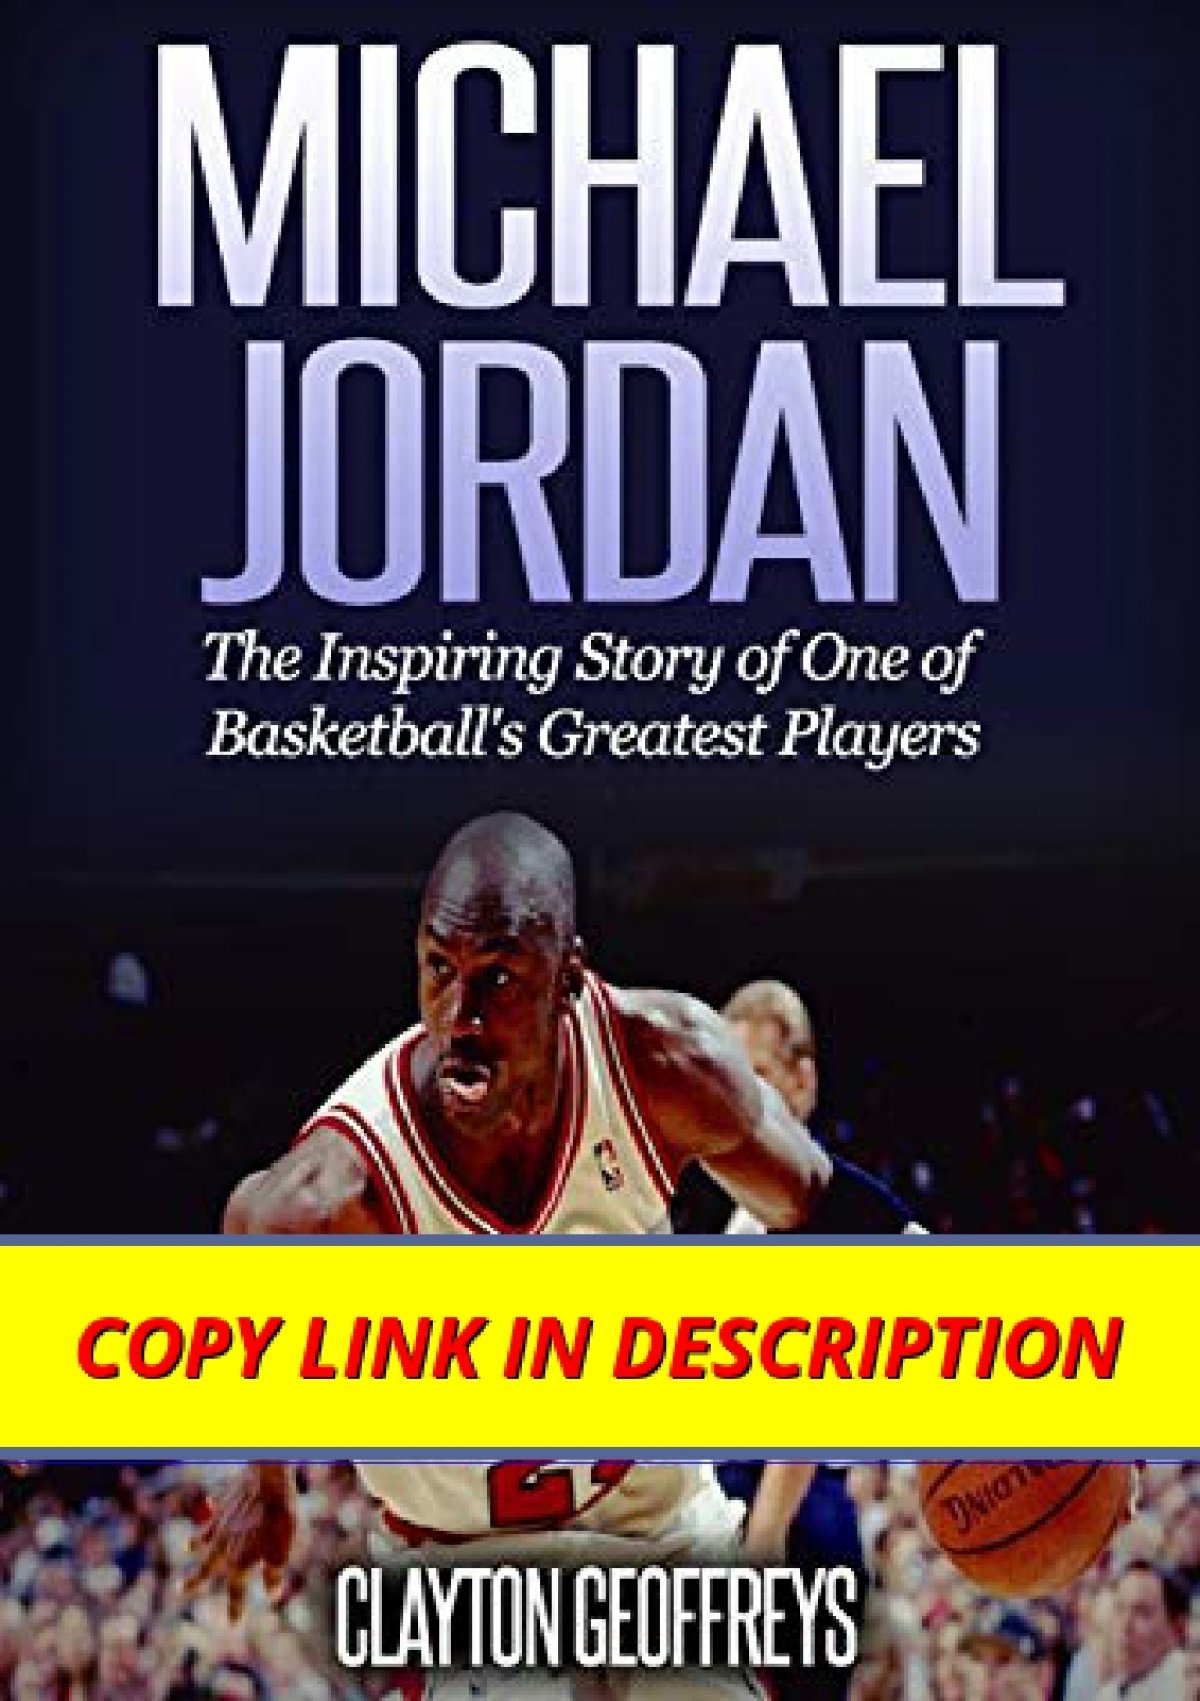 Michael Jordan: The Inspiring Story of One of Basketball's Greatest Players  (Basketball Biography Books)